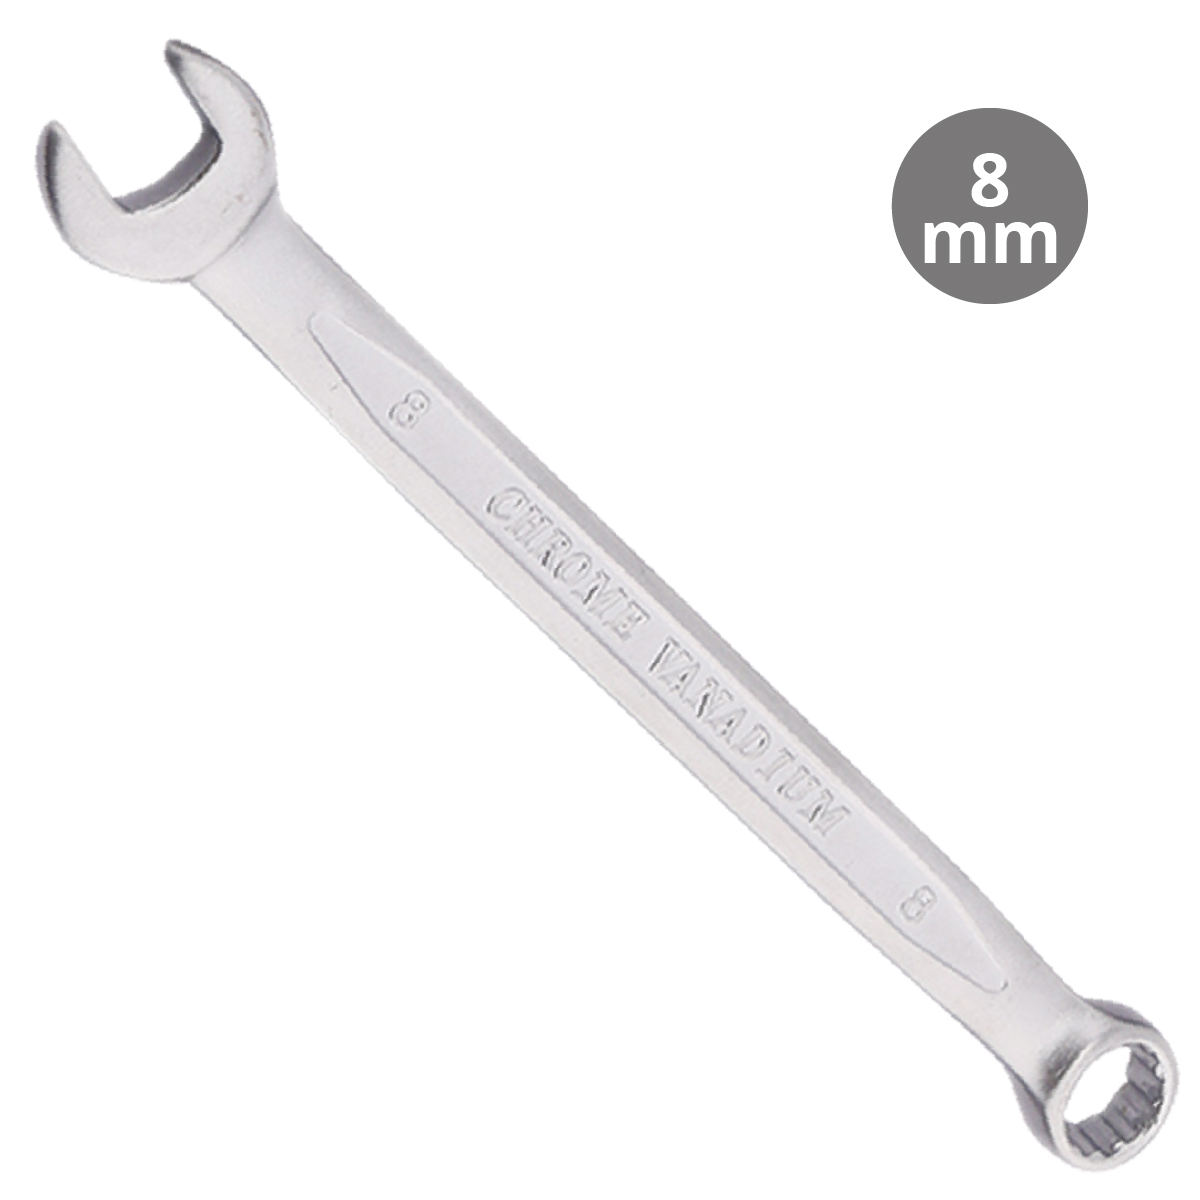 Combination wrench CR-V 8mm